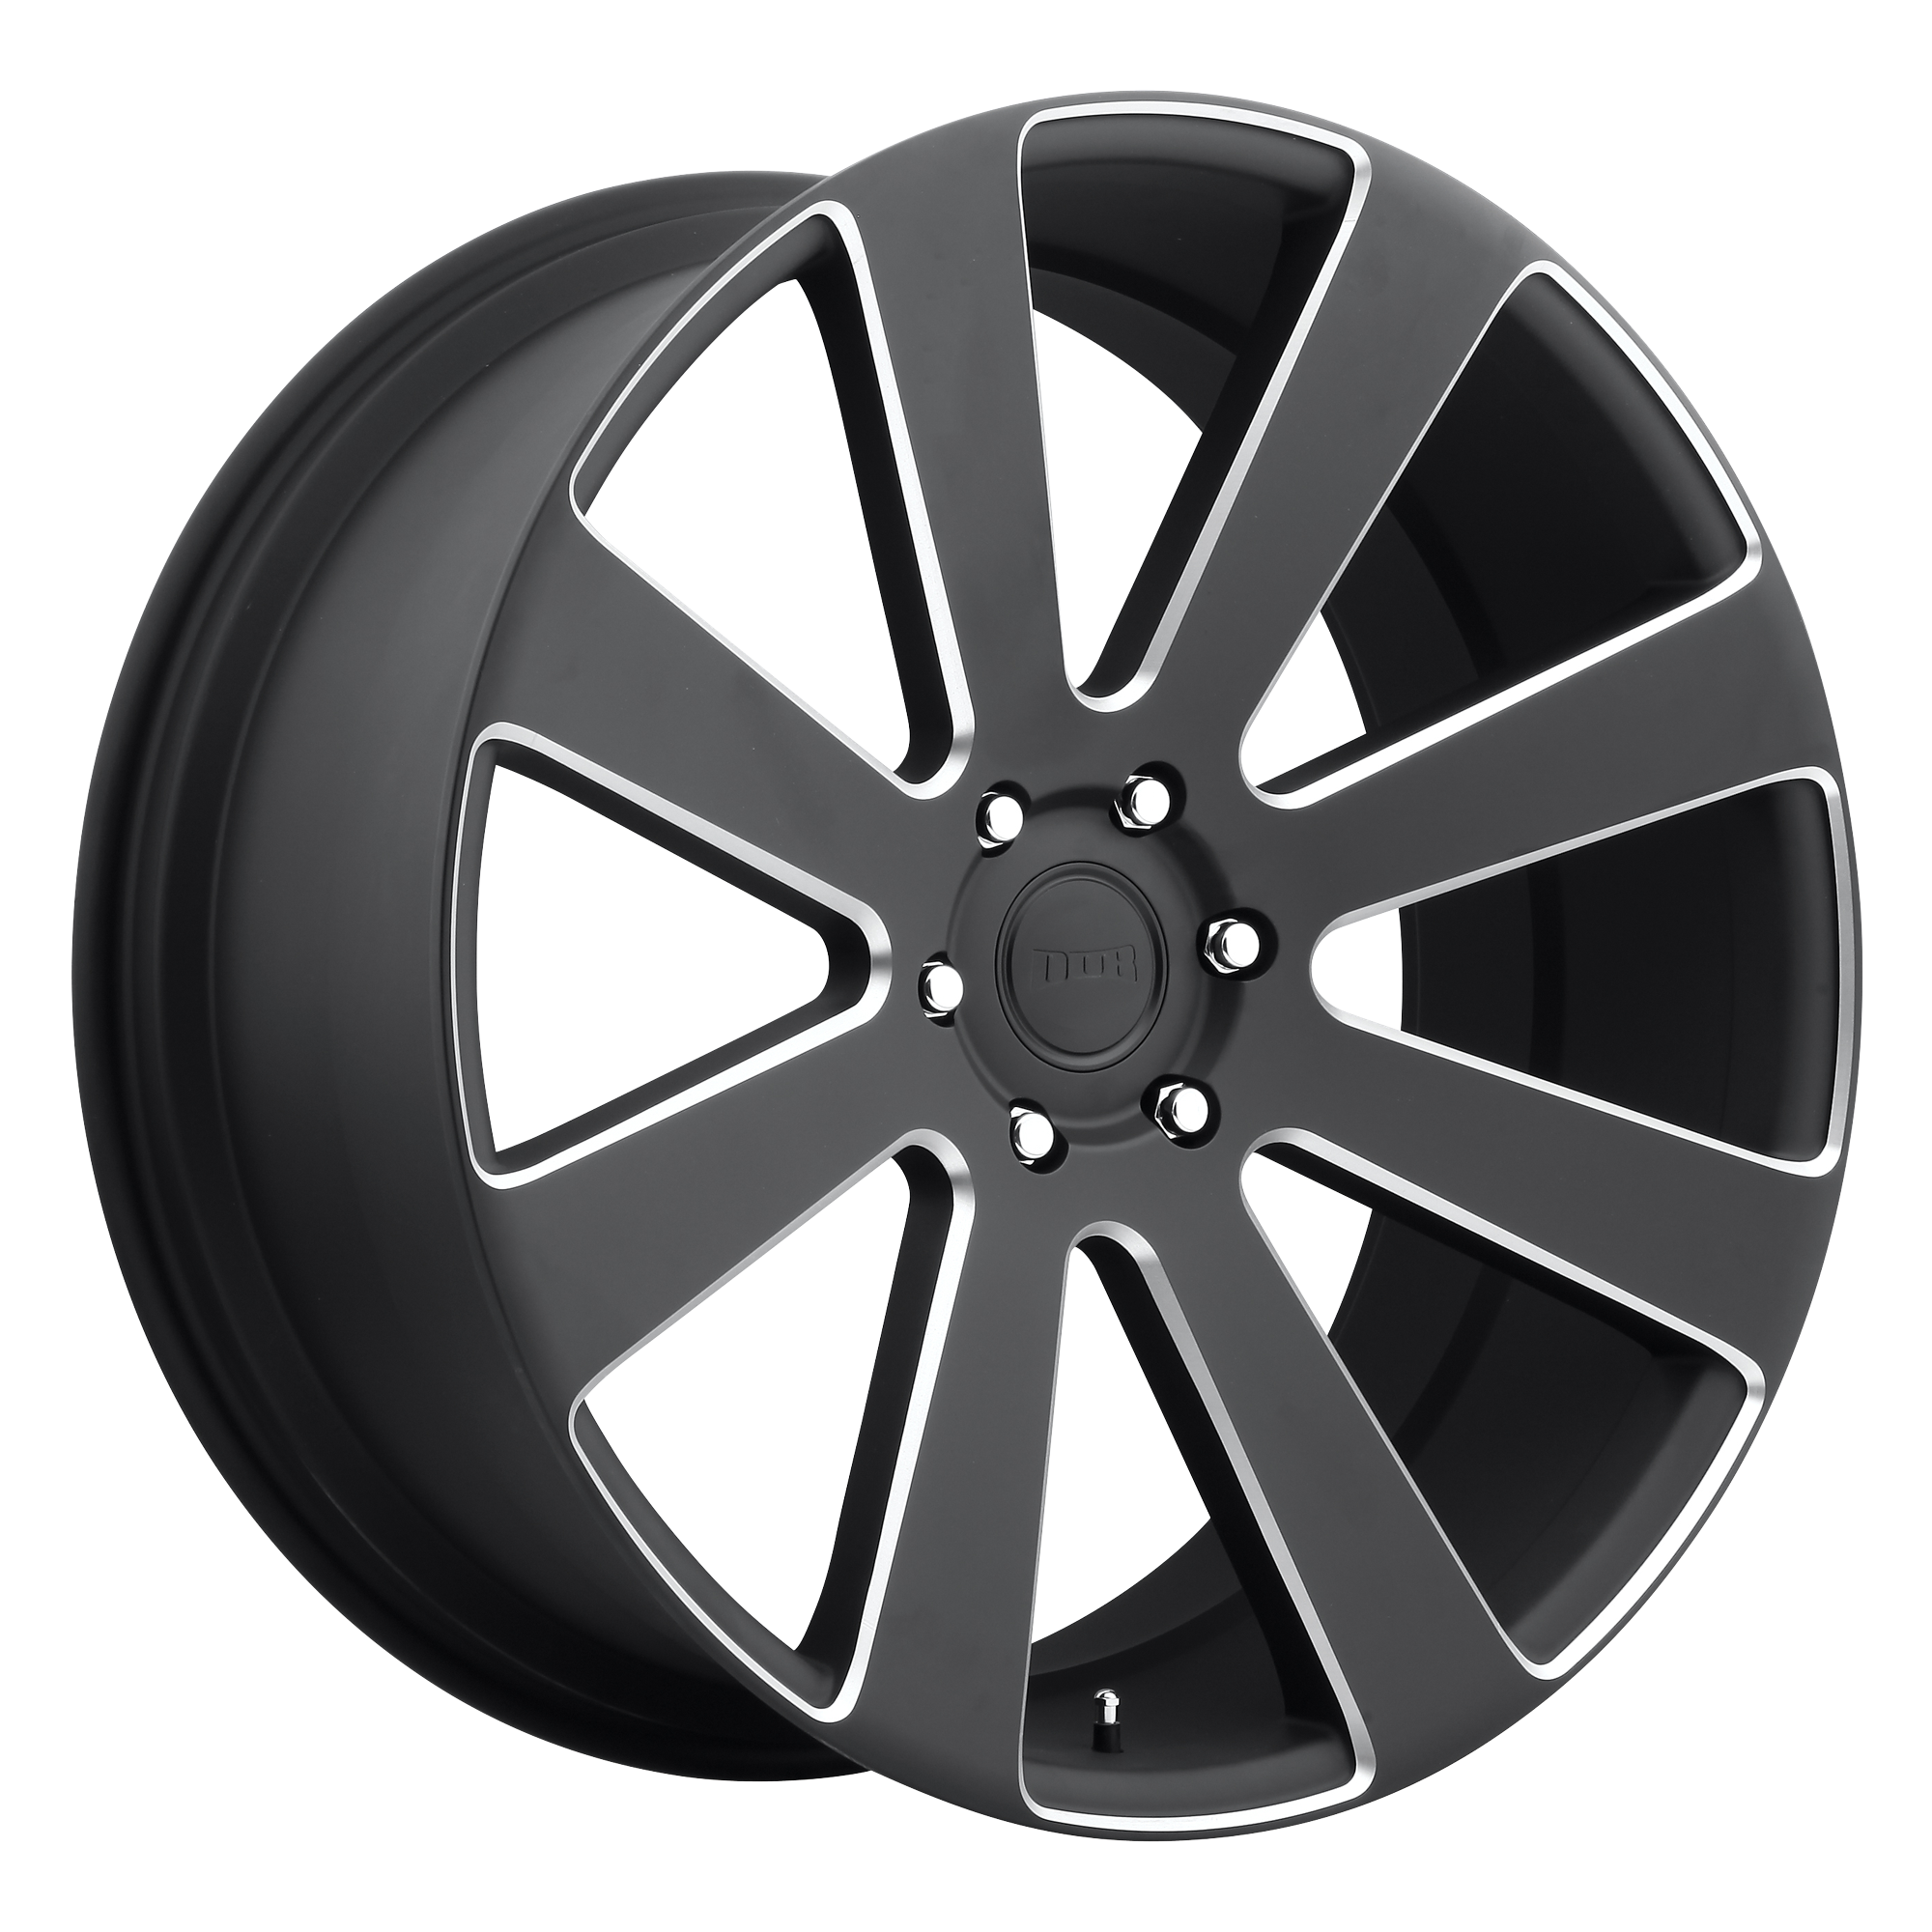 8-BALL 26x10 6x139.70 MATTE BLACK MILLED (30 mm) - Tires and Engine Performance